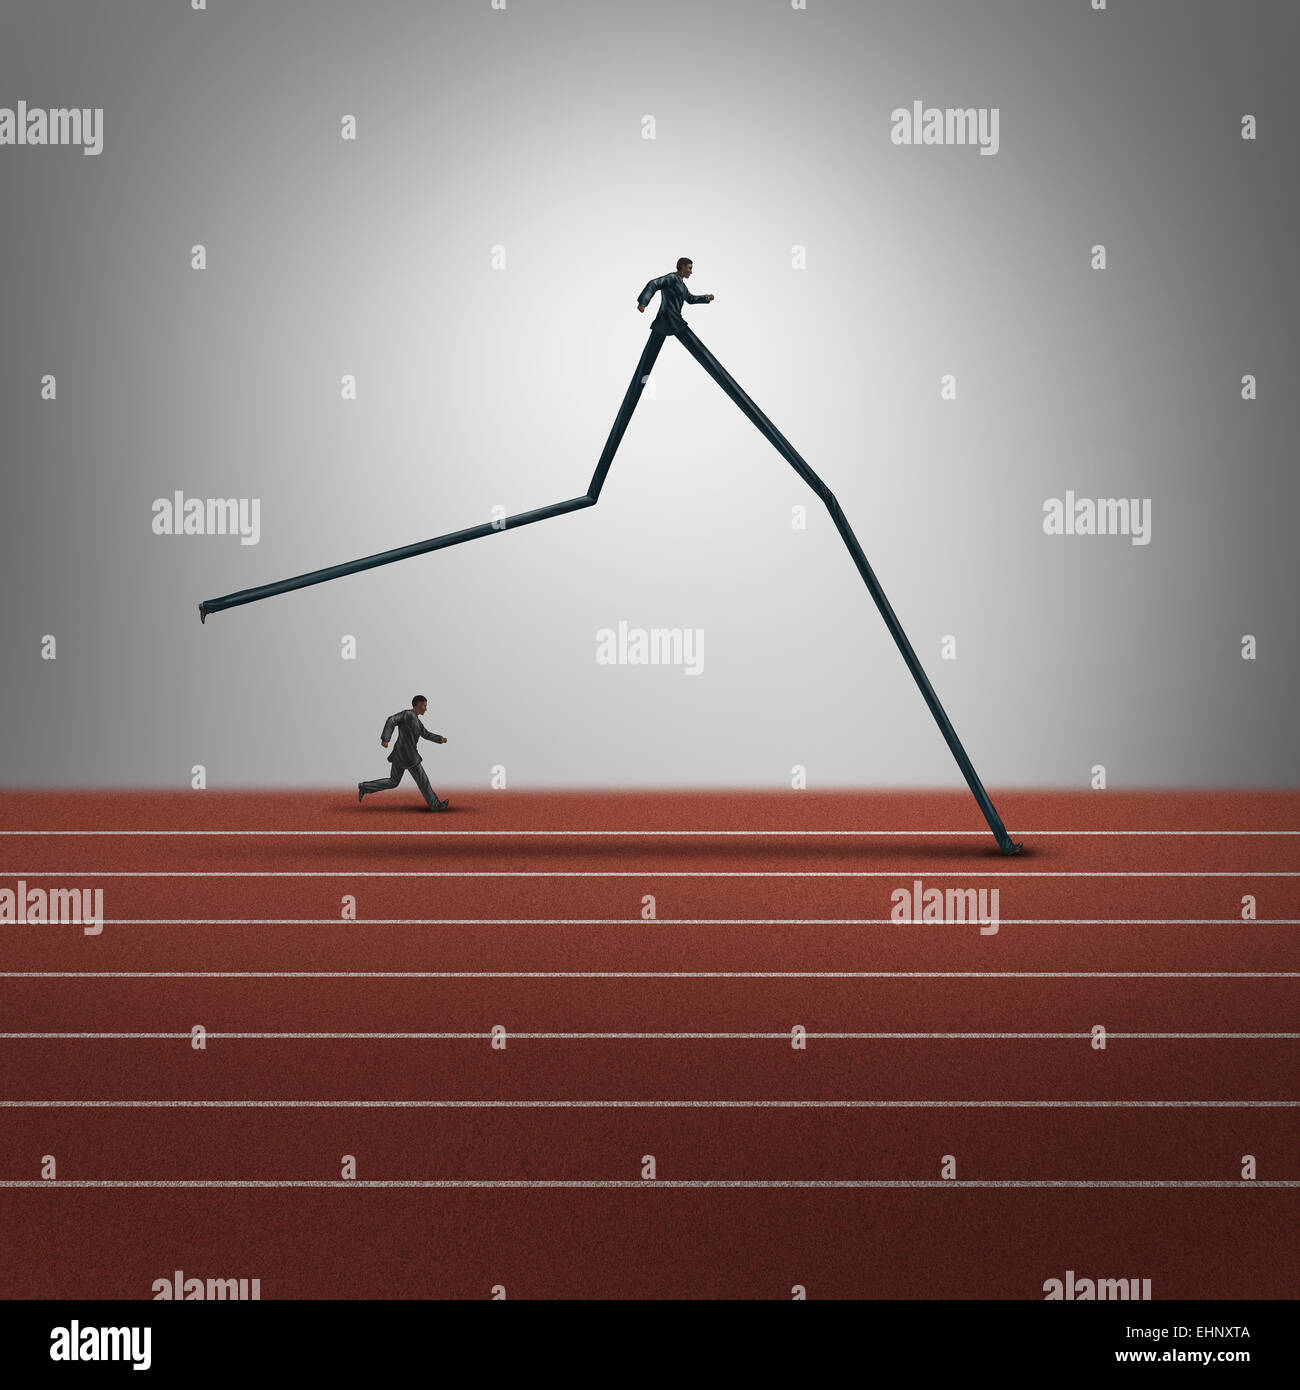 Business skills advantage concept and competitive dominance symbol as two running businessmen with oneperson with very long legs winning the race as a success metaphor for career superiority. Stock Photo